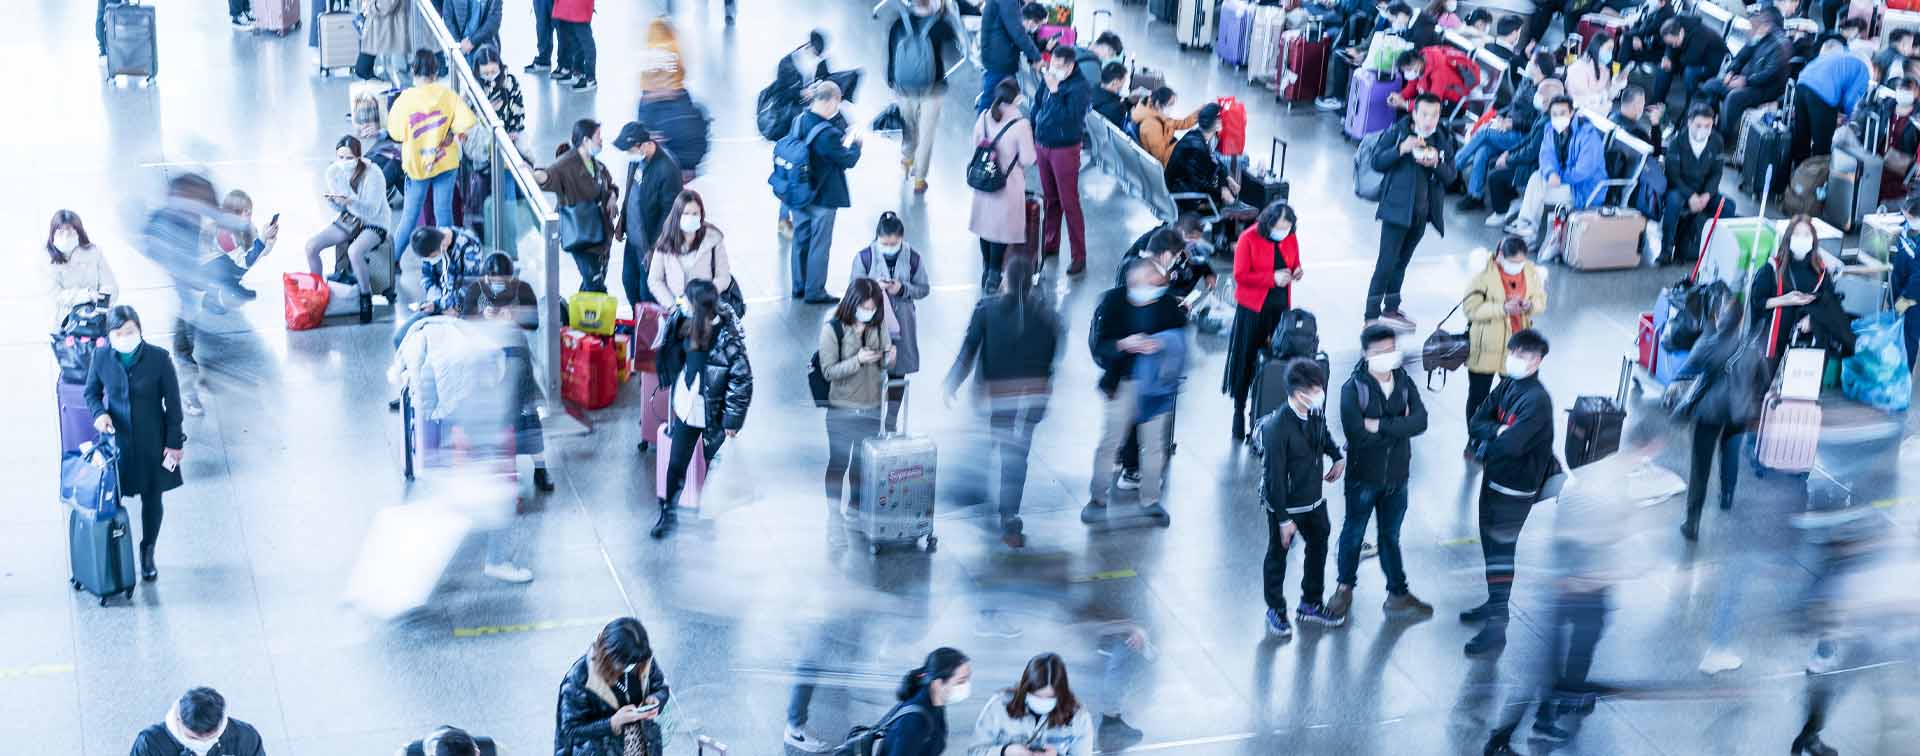 Top-down view of people in blurry movement or waiting in an aiport with luggage.